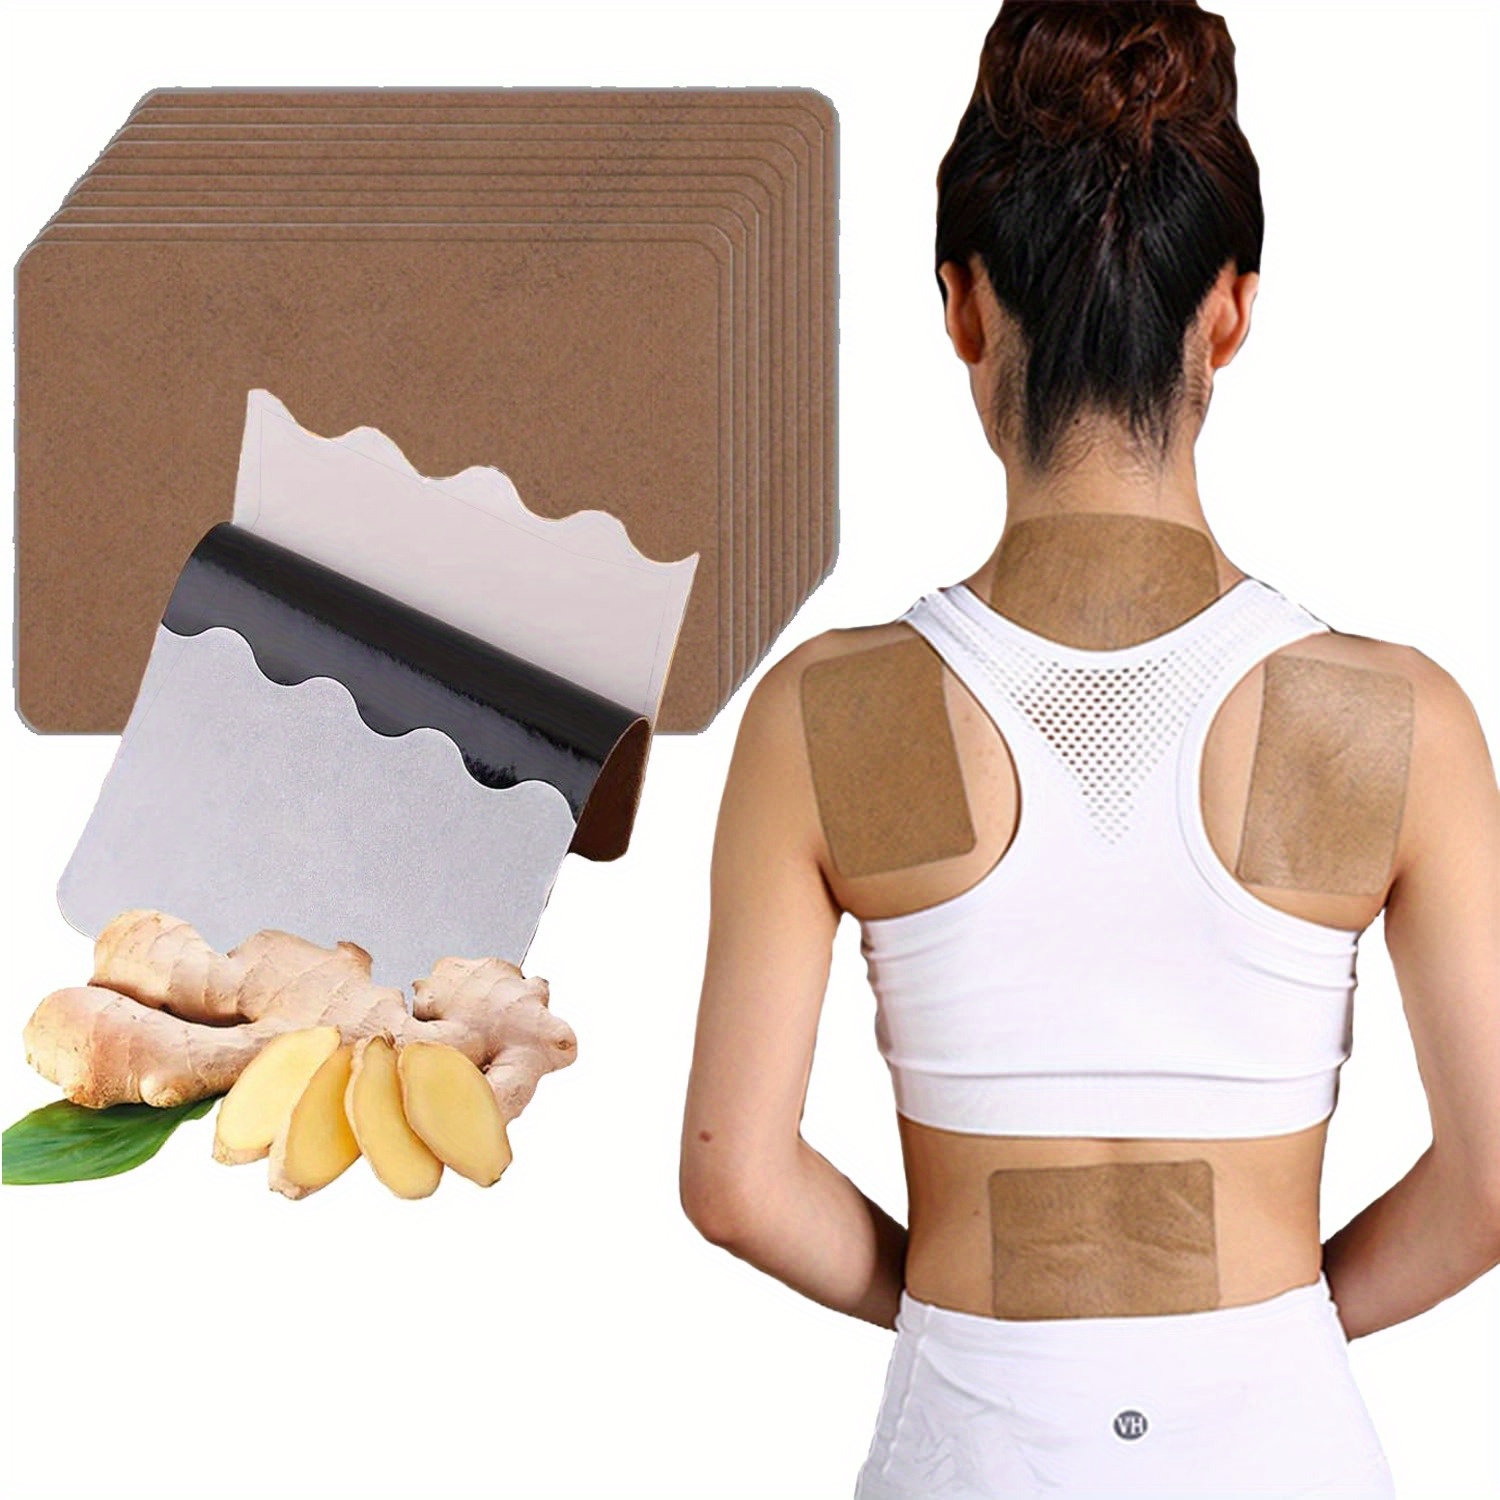 

40/80pcs Self-heating Ginger Heat Patch, Natural Heating Pads, Helps The Body To Generate Heat, For Shoulder, Neck, Hand, Back, Feet, Knee